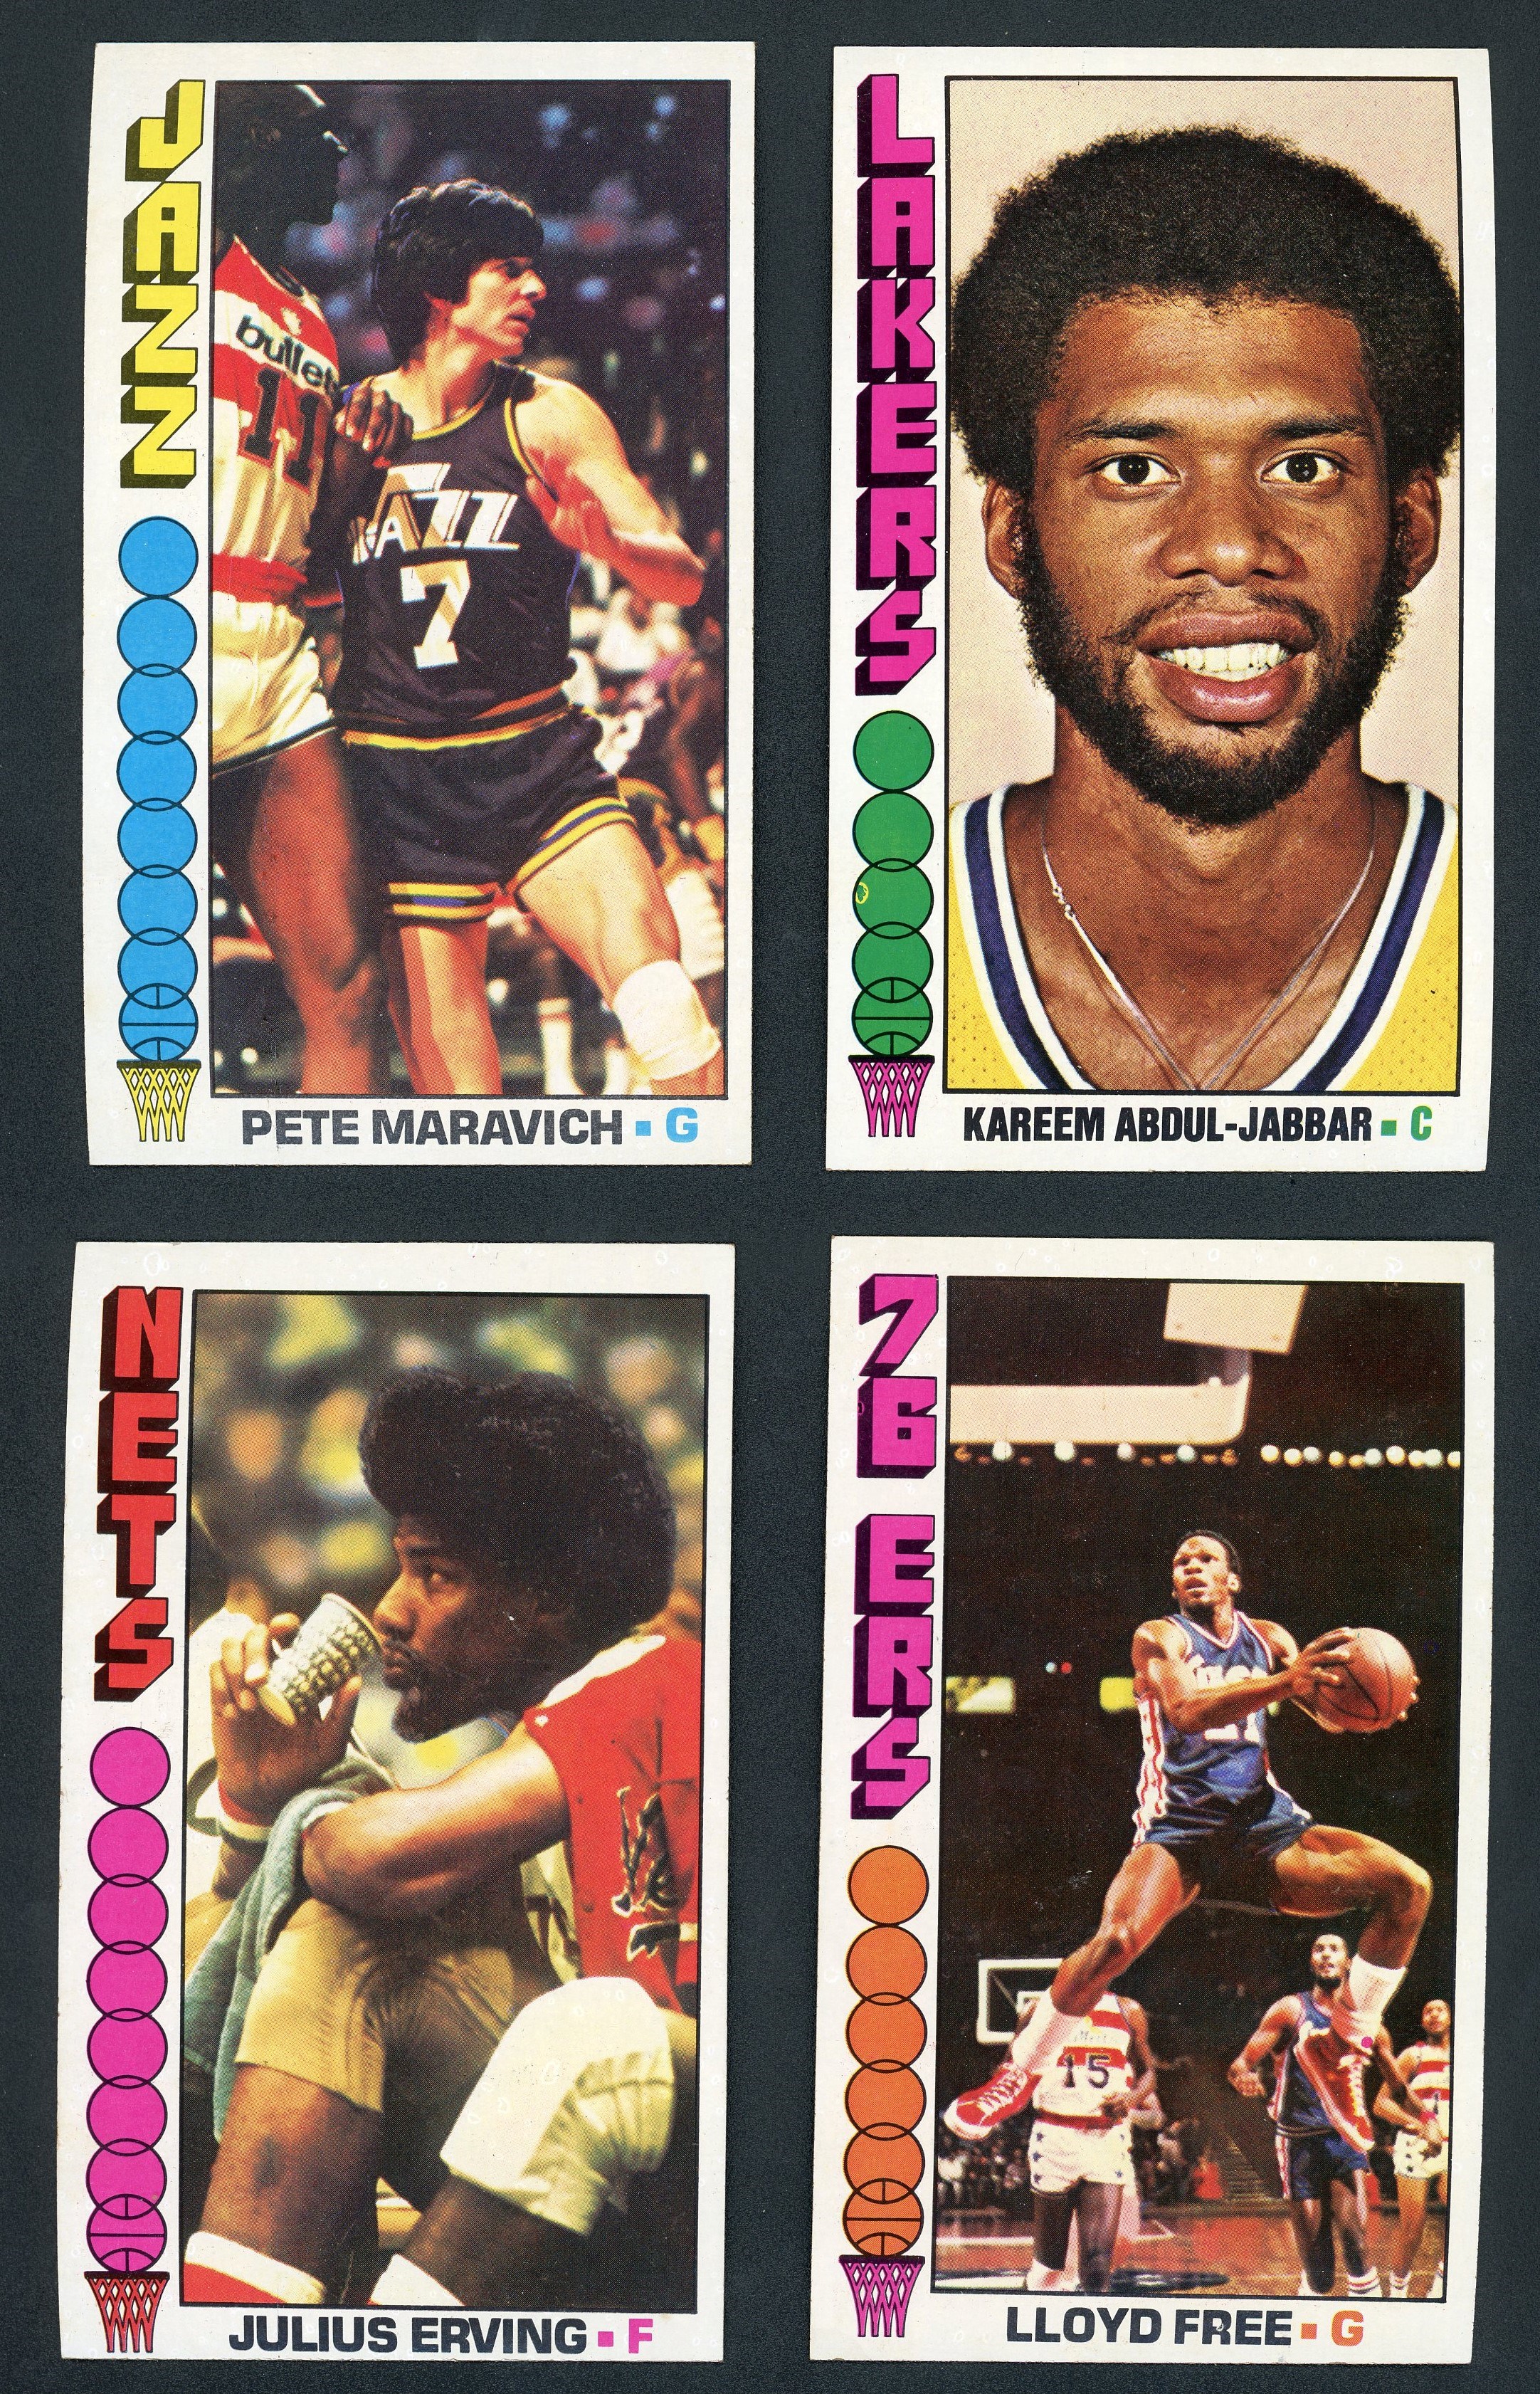 Baseball and Trading Cards - 1976/77 Topps "Tall Boy" Basketball Complete Set